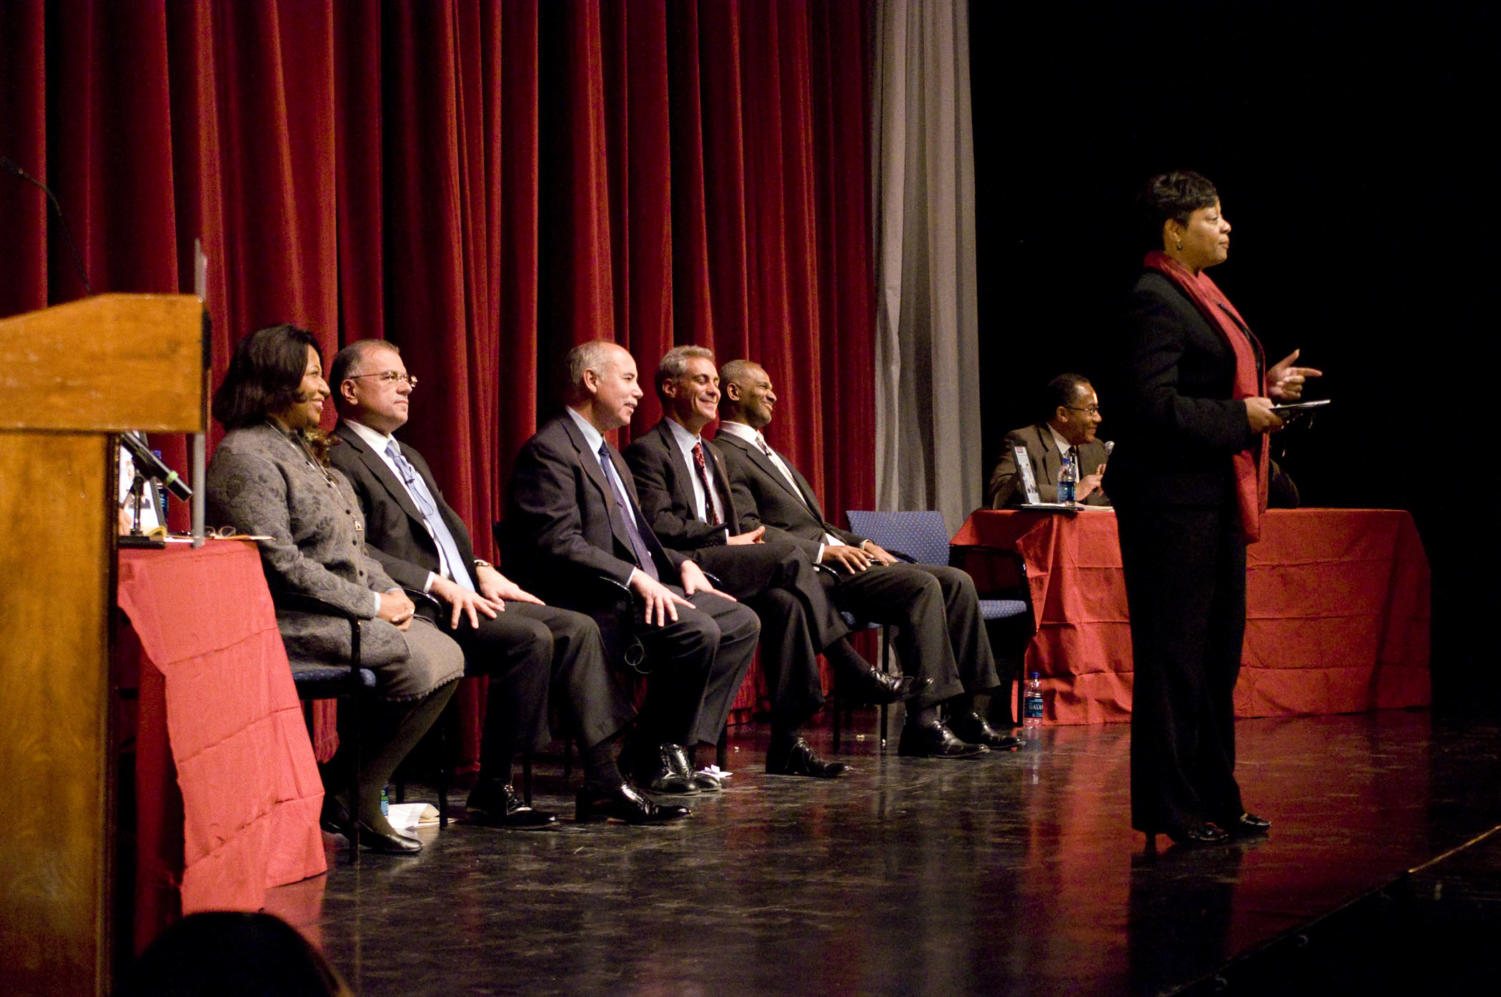 Many times throughout the evening, Watkins stood to address the audience, including during her closing remarks.